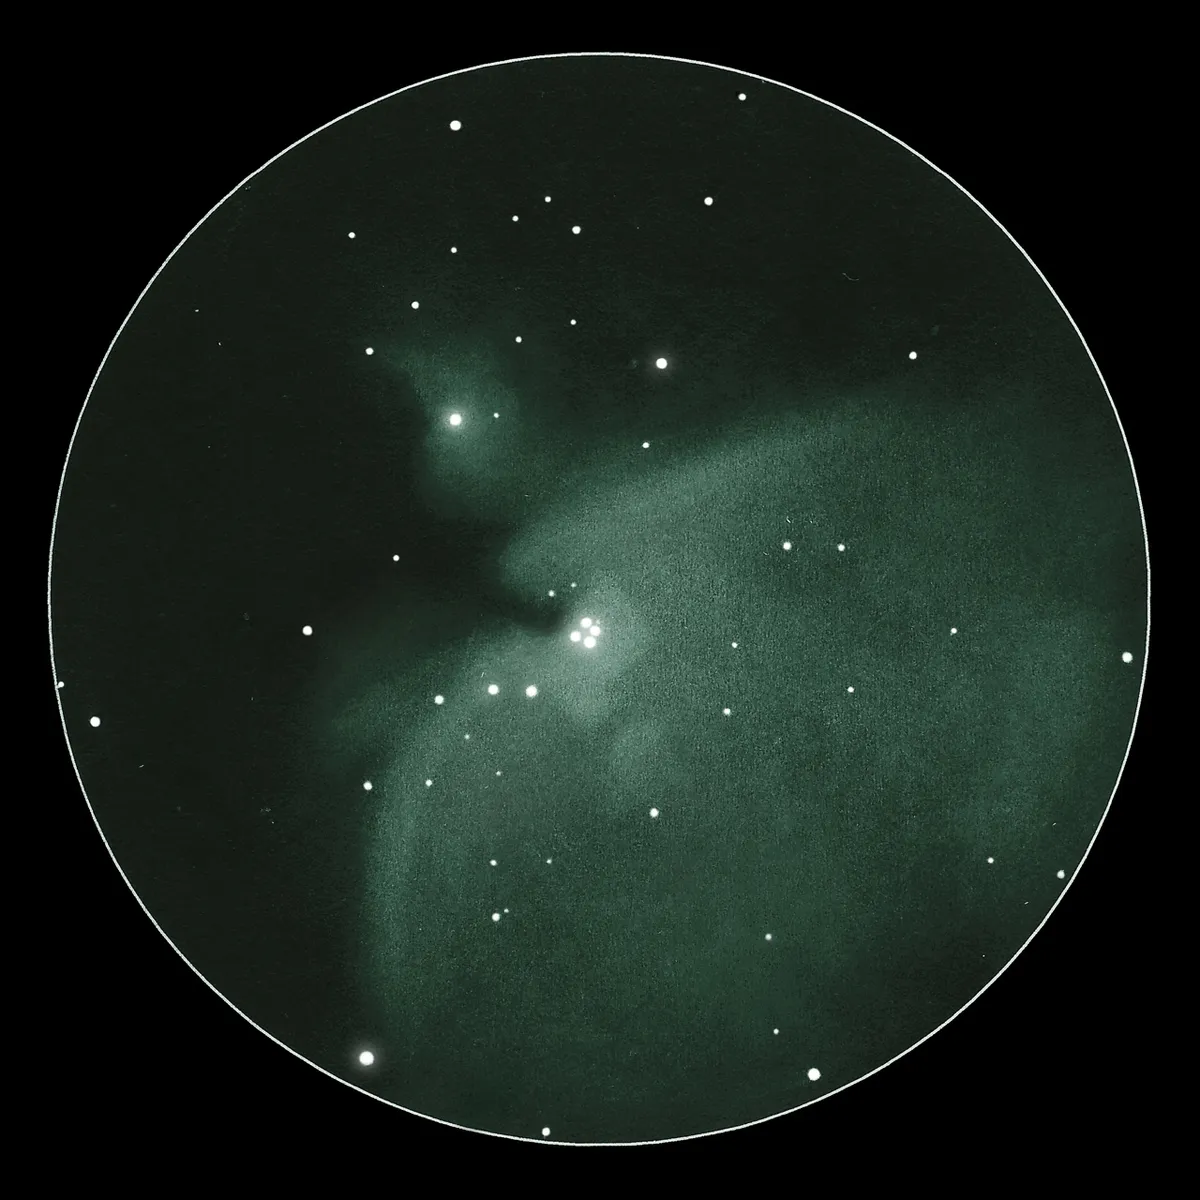  View of the Orion Nebula through an 8-inch telescope, 80x magnification. Credit: Michael Vlasov